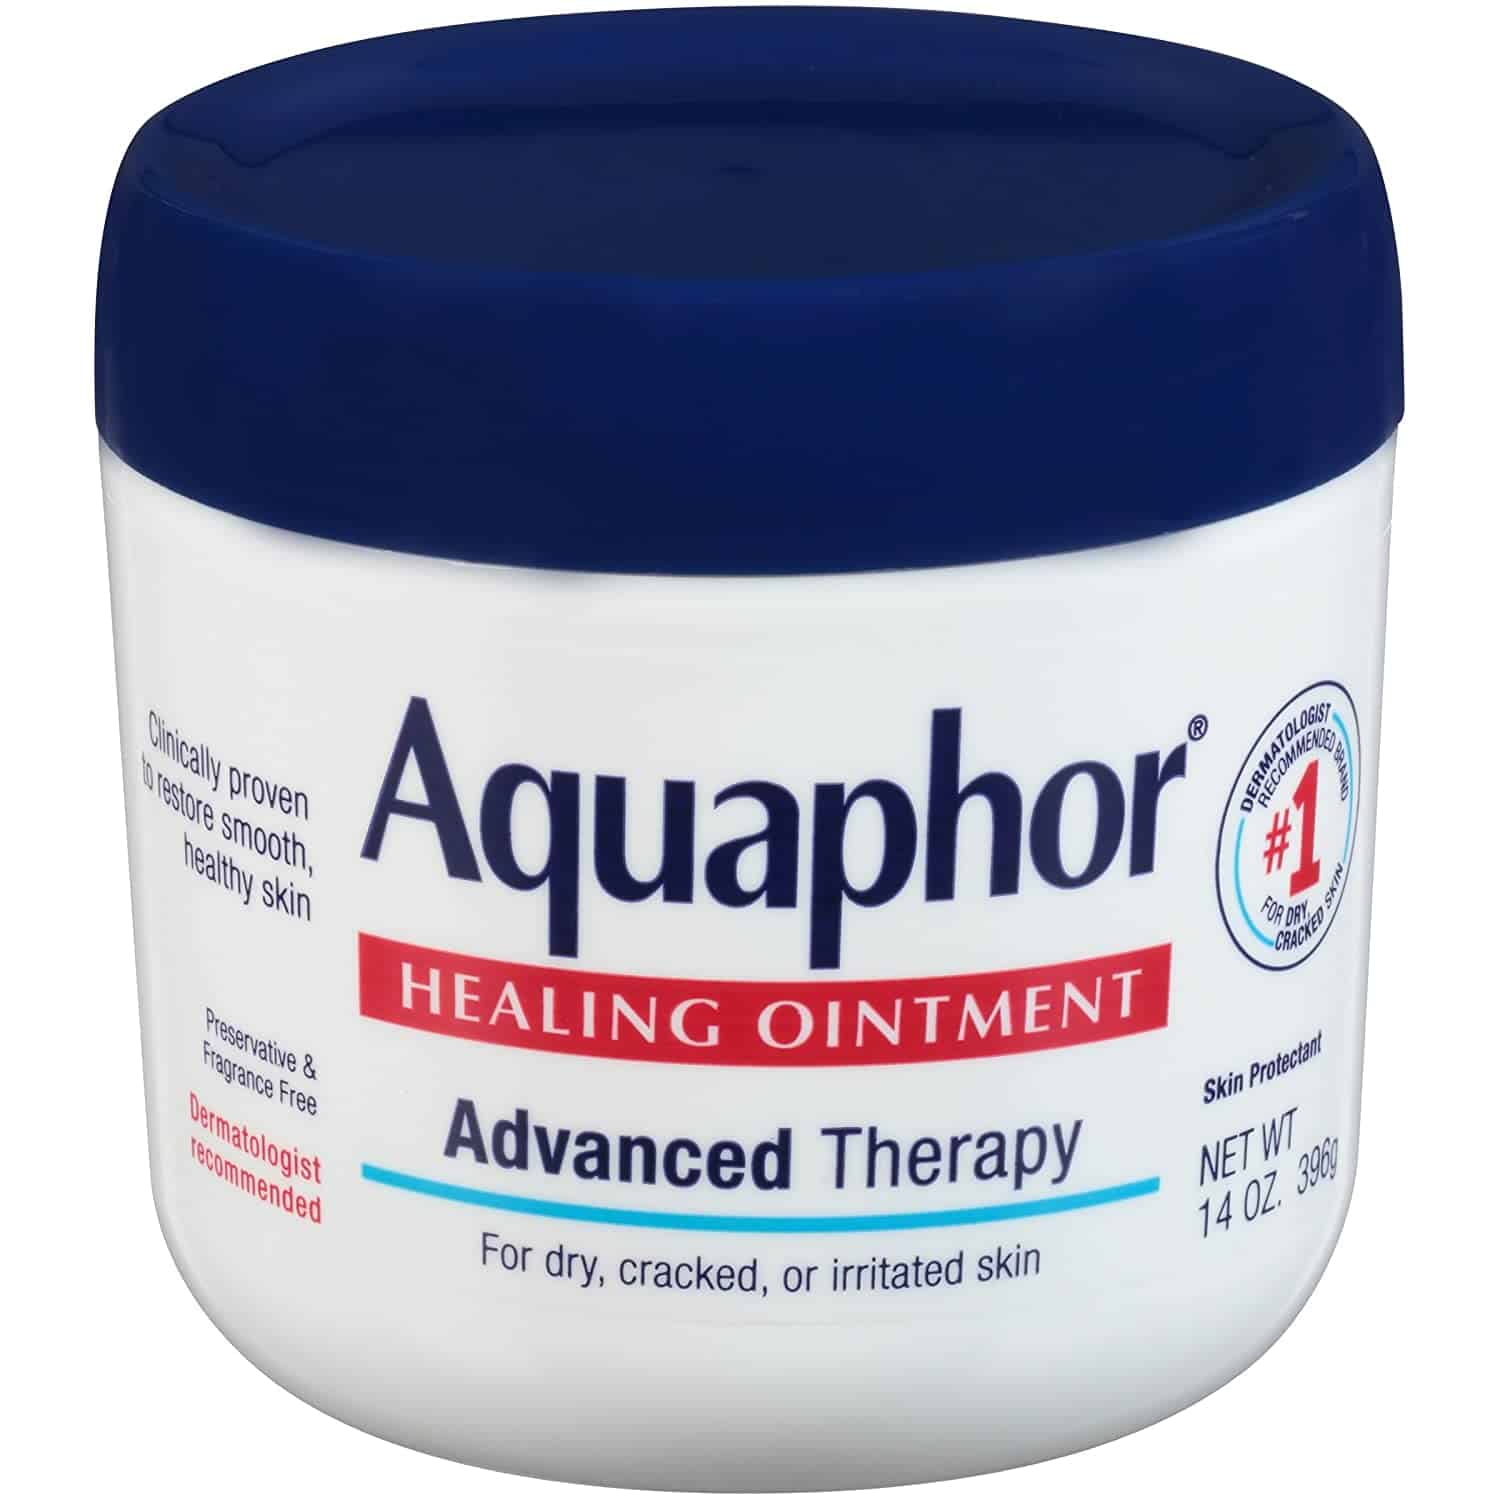 aquaphor healing ointment advanced therapy